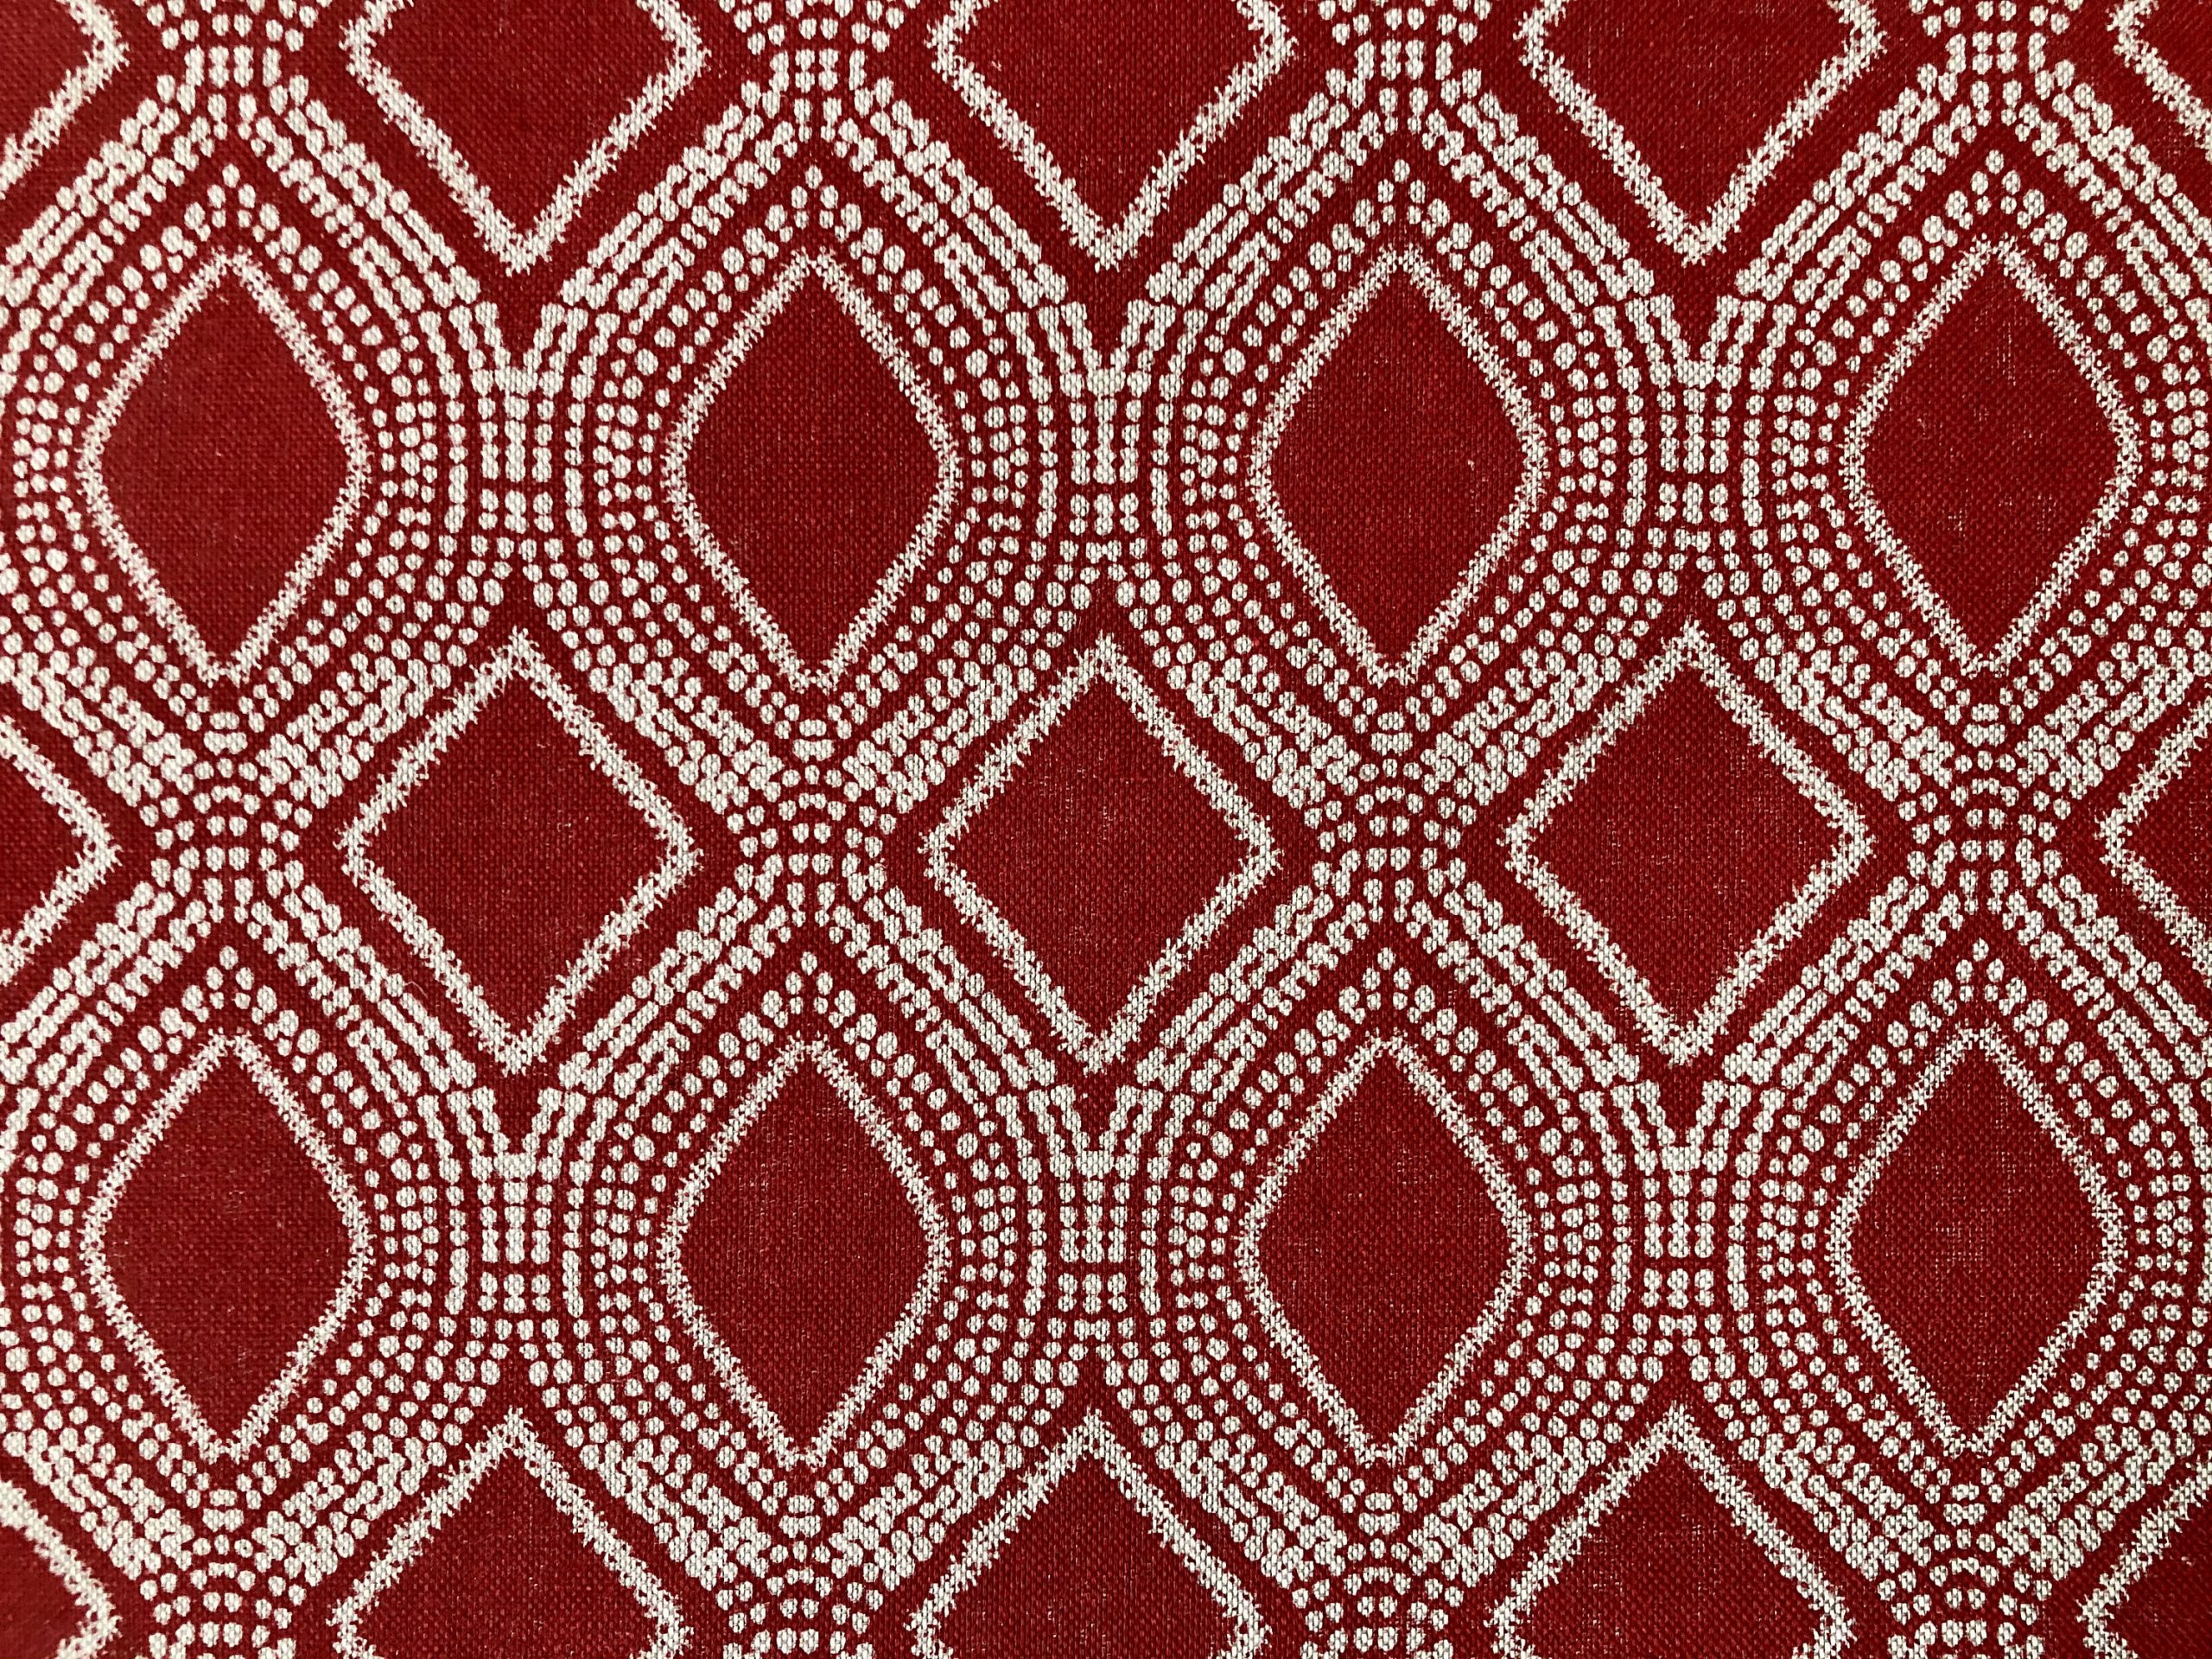 Decorative Diamond Design in Red and Gold, Upholstery Fabric, Heavy  Drapery, Polyester, 54 Wide